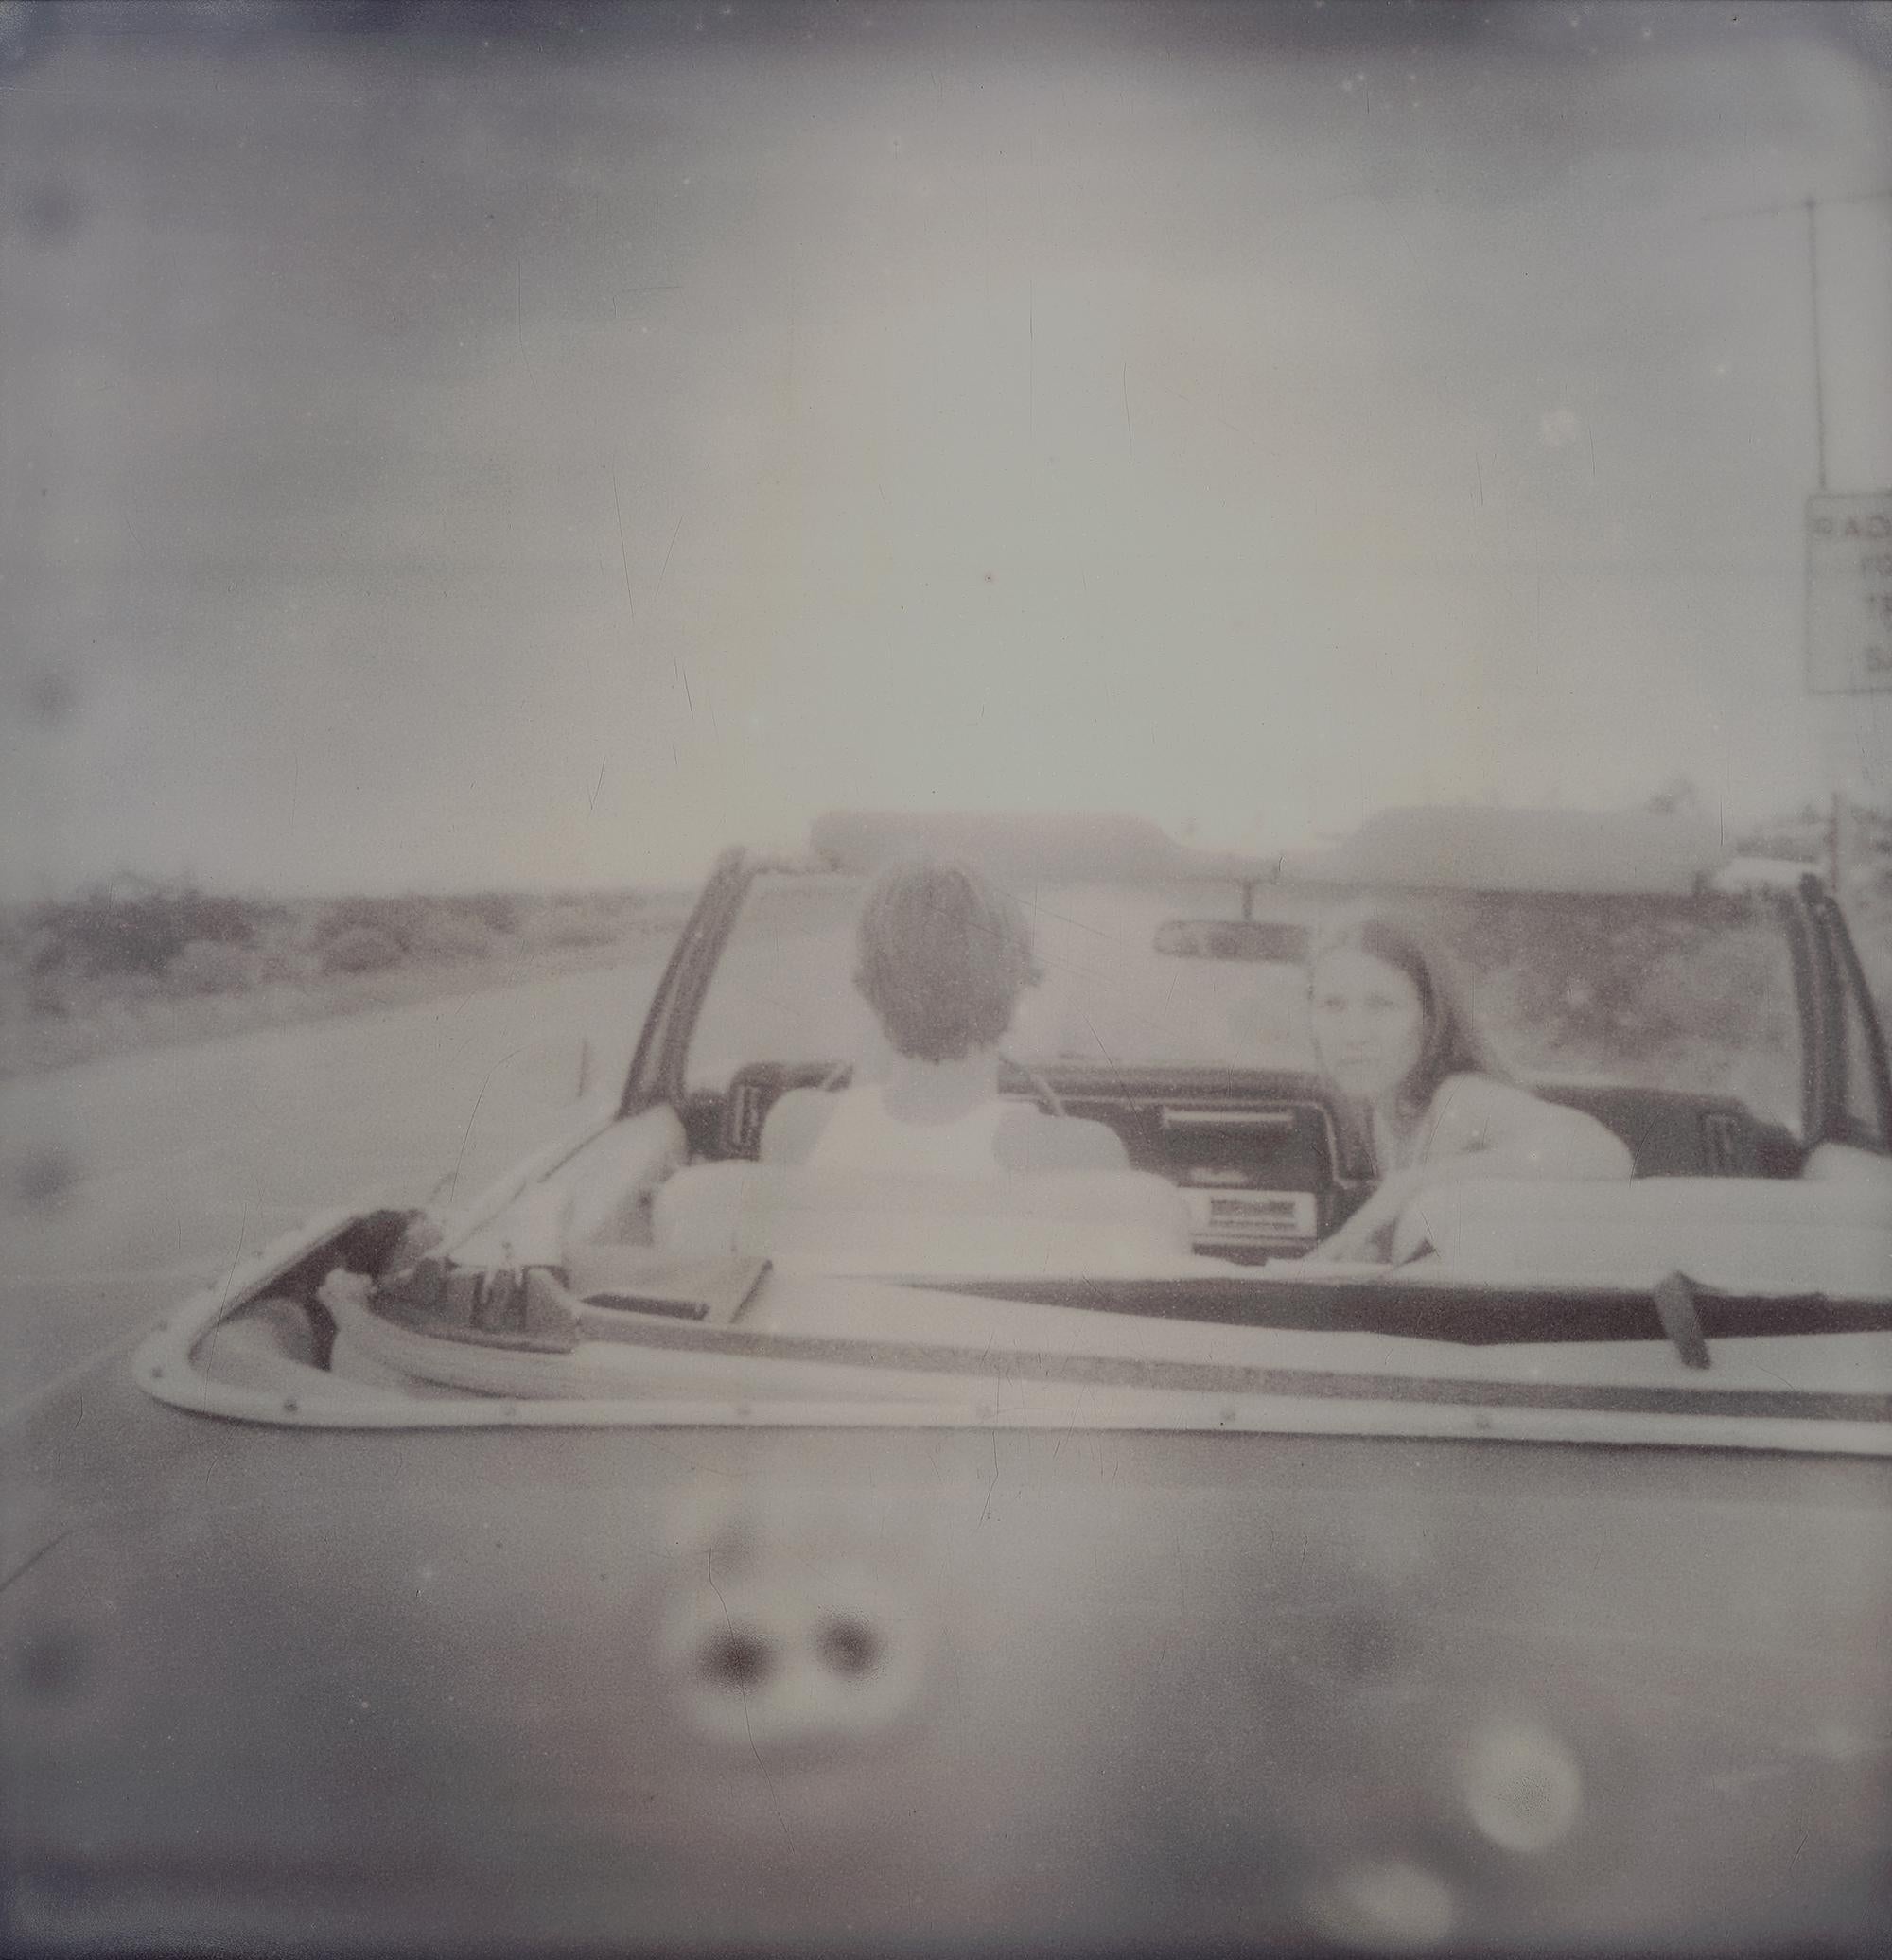 Leaving - Contemporary, 21st Century, Polaroid, Landscape, Love, Outdated - Photograph by Stefanie Schneider